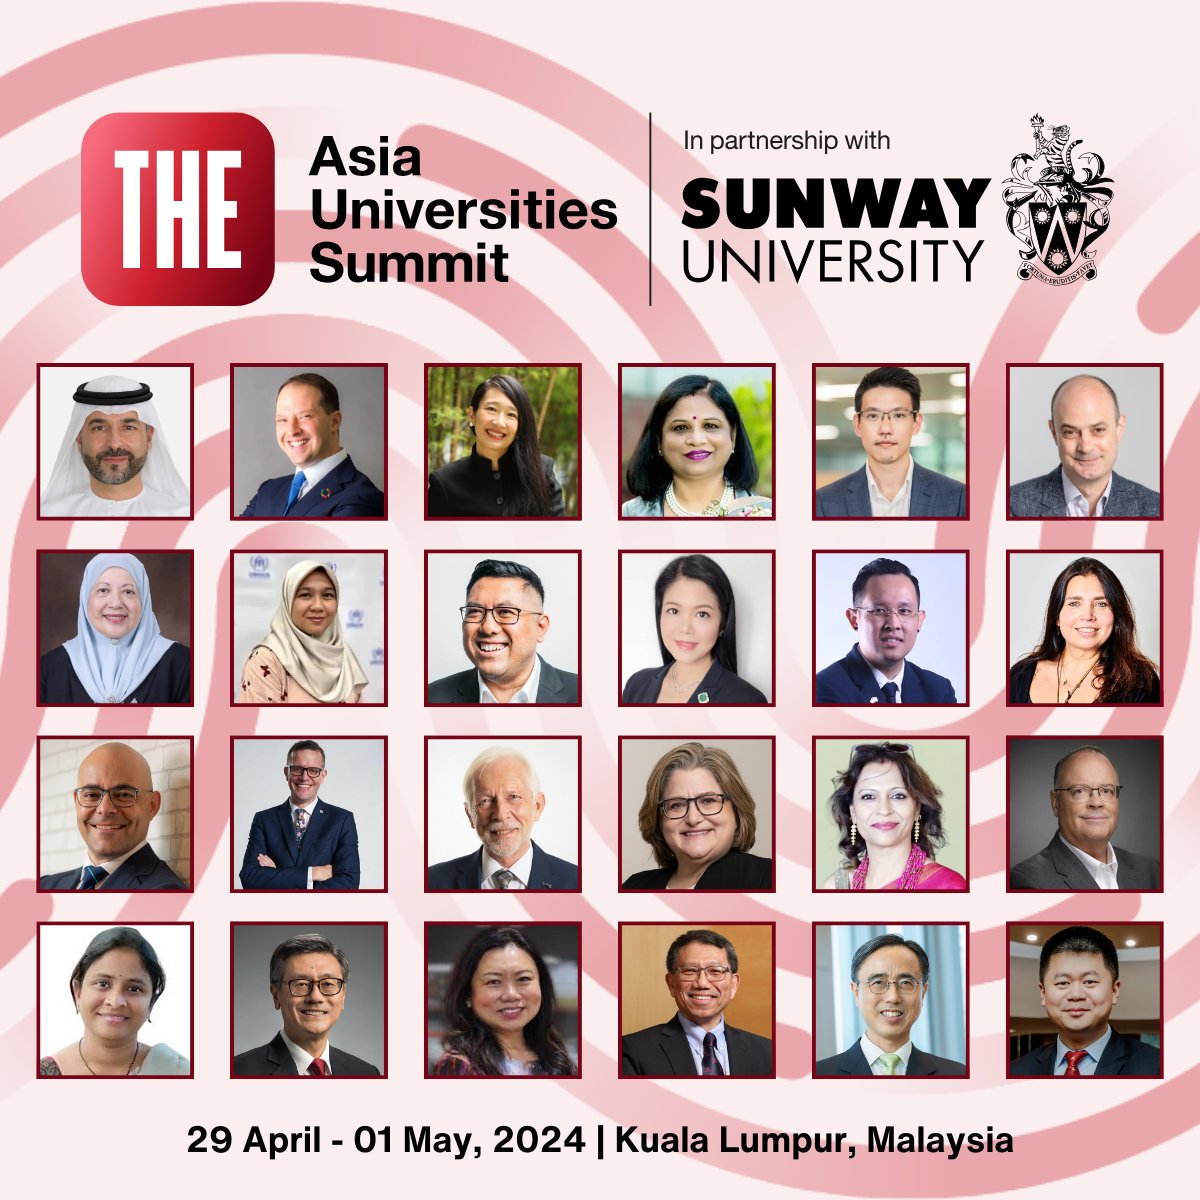 🕒The countdown is on - we are less than two weeks away from the #THEasia Summit, in partnership with @SunwayU. 

Take a look at some of the industry experts joining us in Kuala Lumpur, Malaysia, from 29 April - 1 May 2024. 

🎟️Book your place now: timeshighered-events.co/4d51hQg